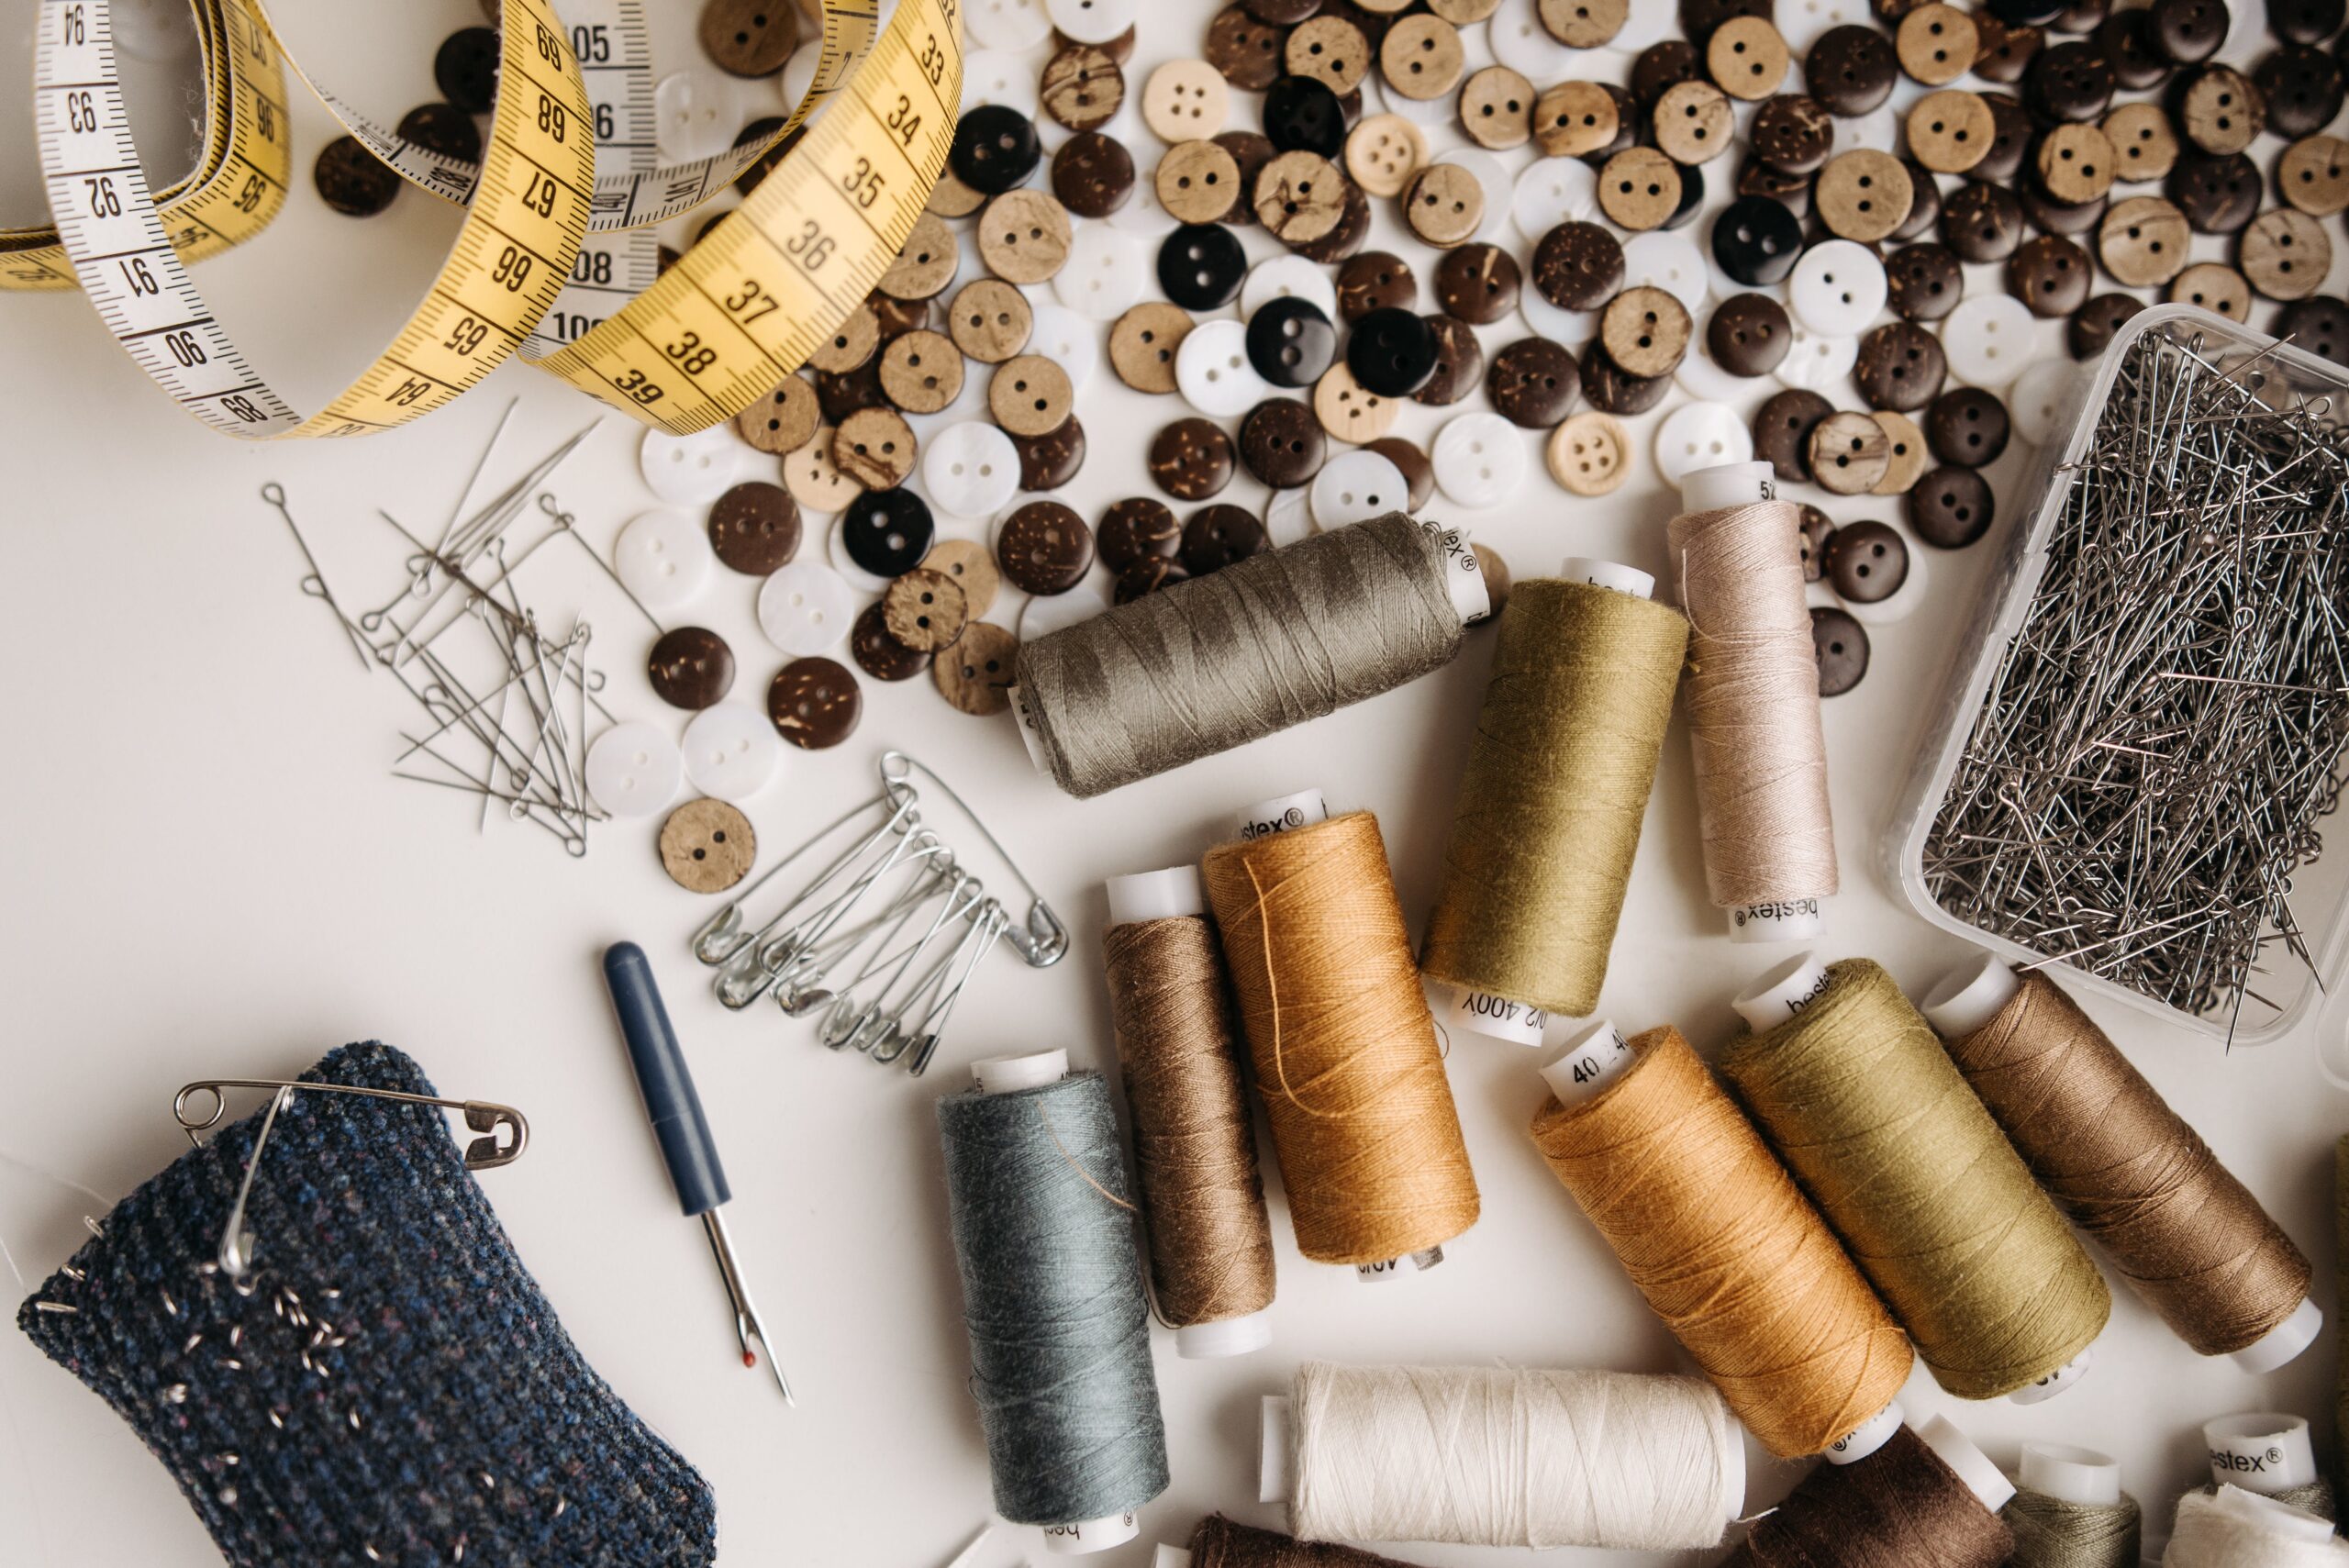 Tape measure, buttons, needles, pins, and spools of thread laid out across of a table for suit alterations